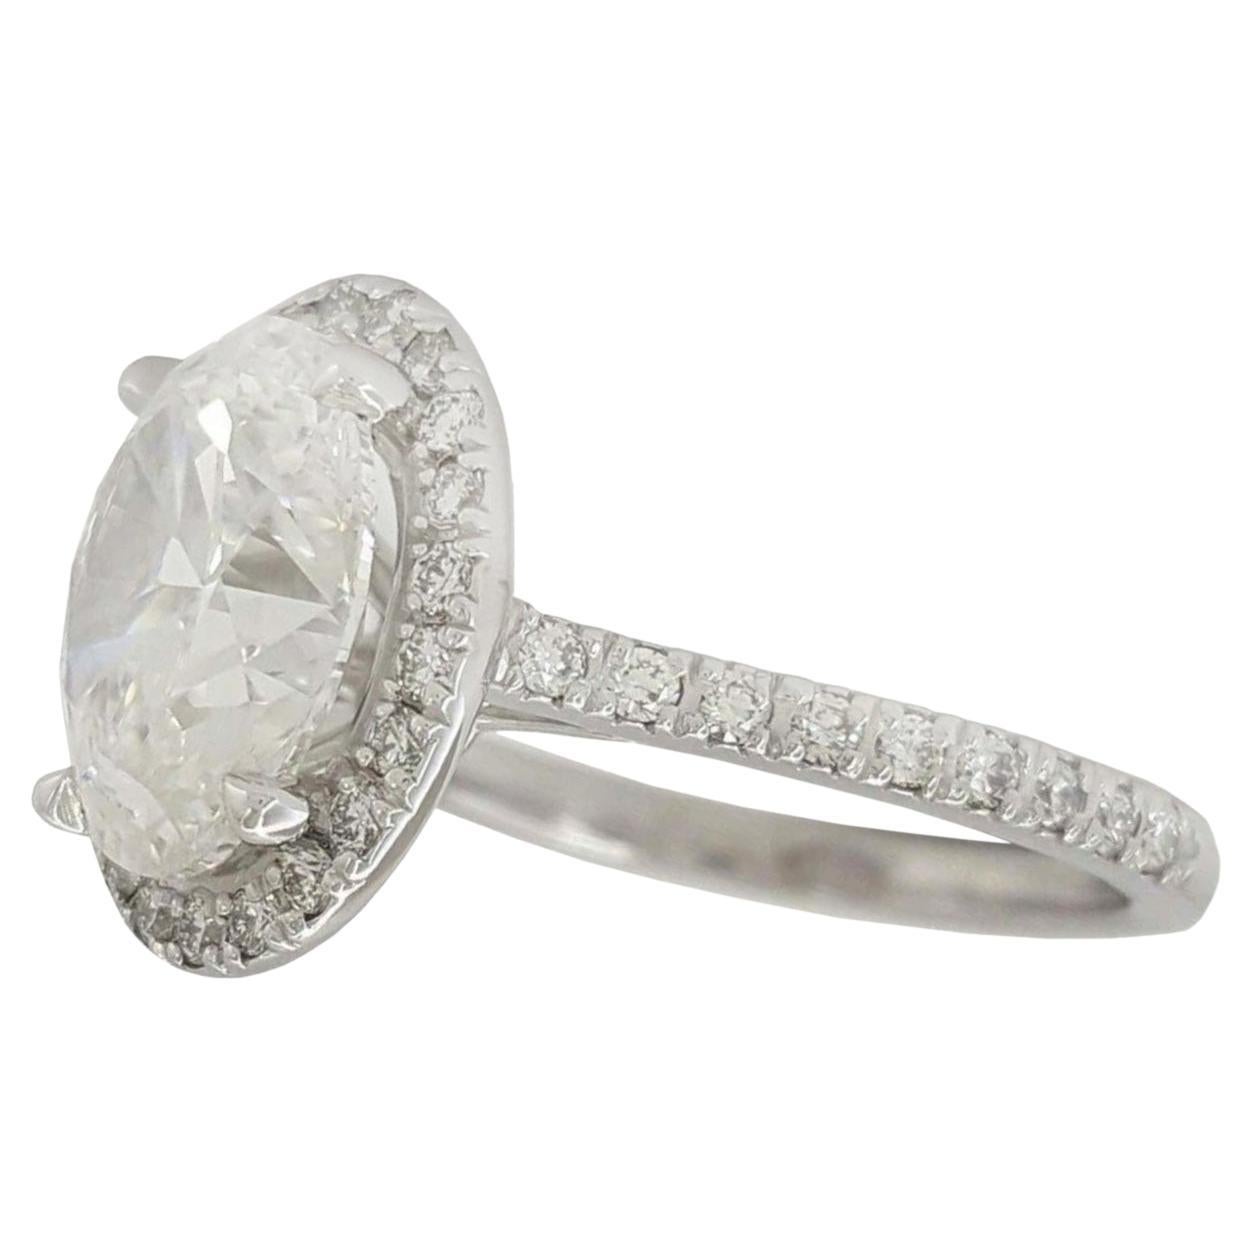 Exceptional GIA Certified 3 Carats  Diamond Ring
D Color 
VS2 Clarity